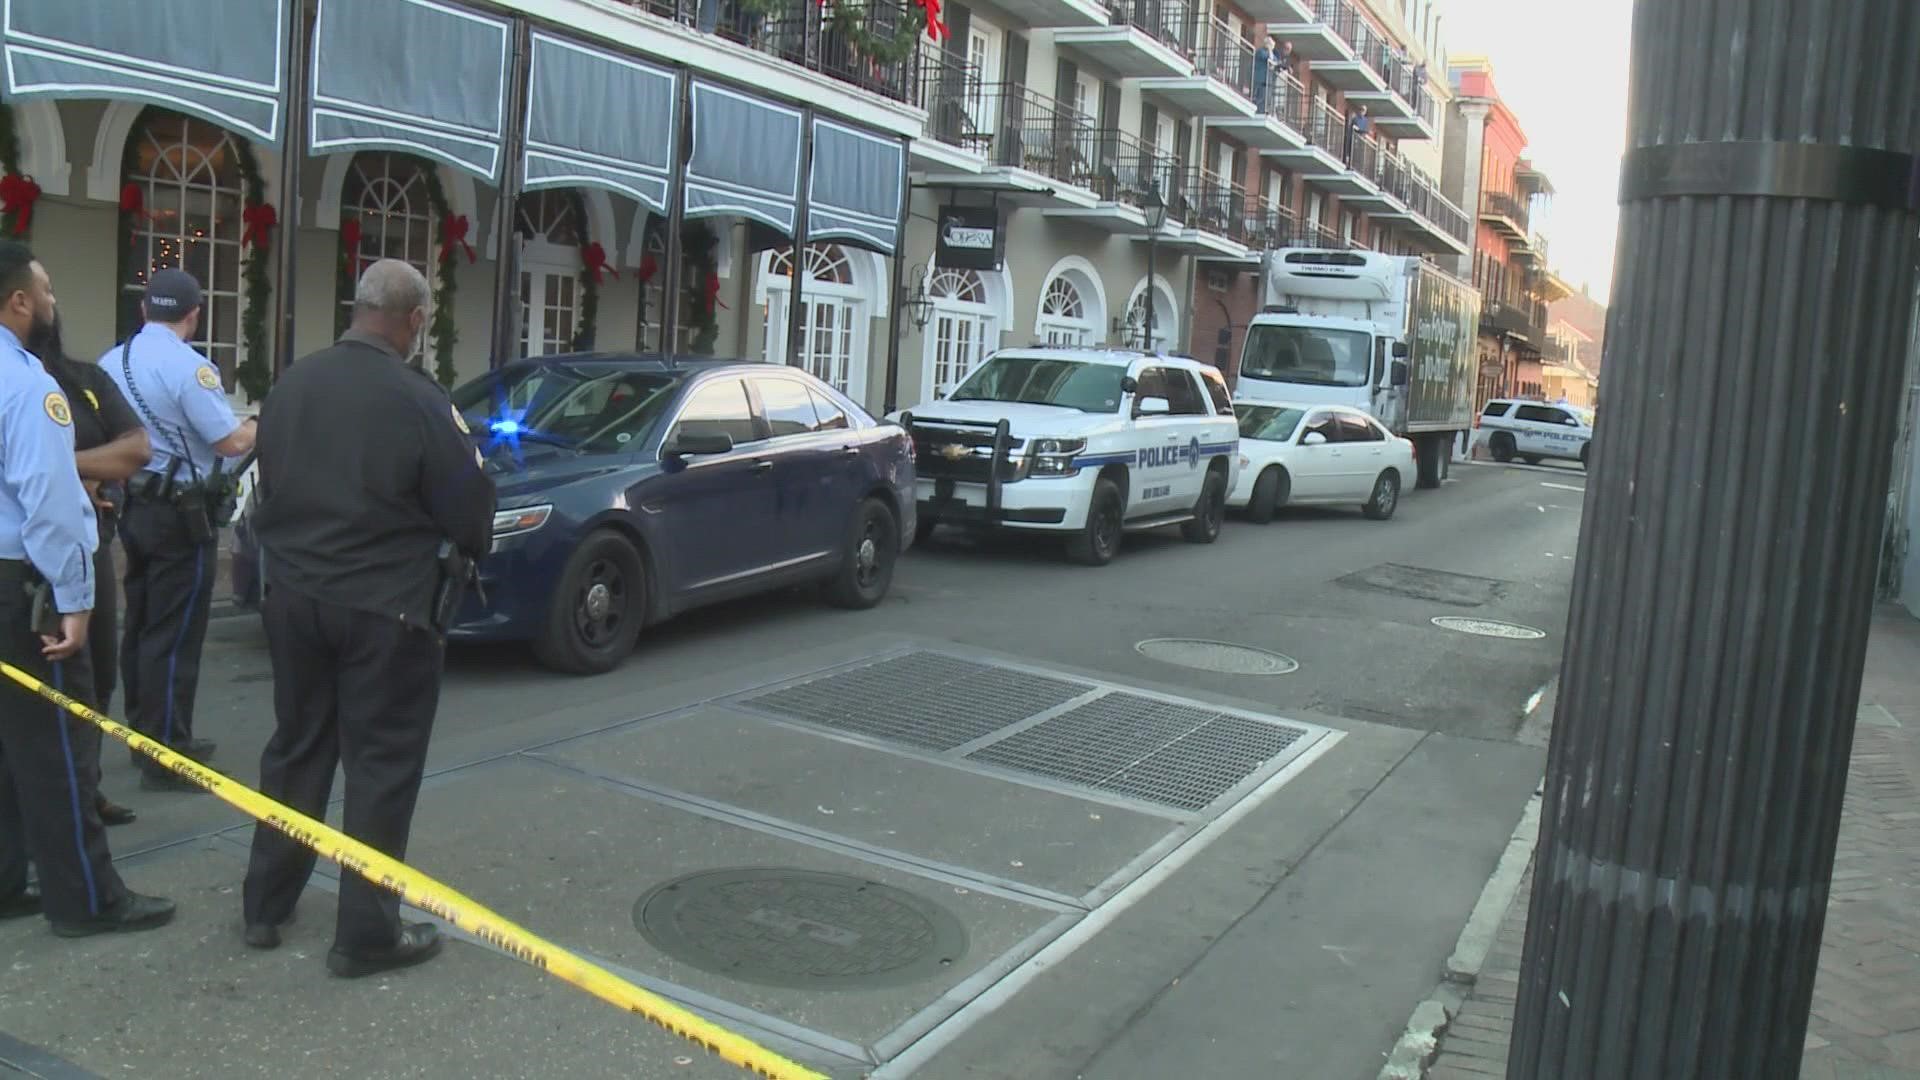 NOPD has new information about a deadly shooting in the French Quarter.